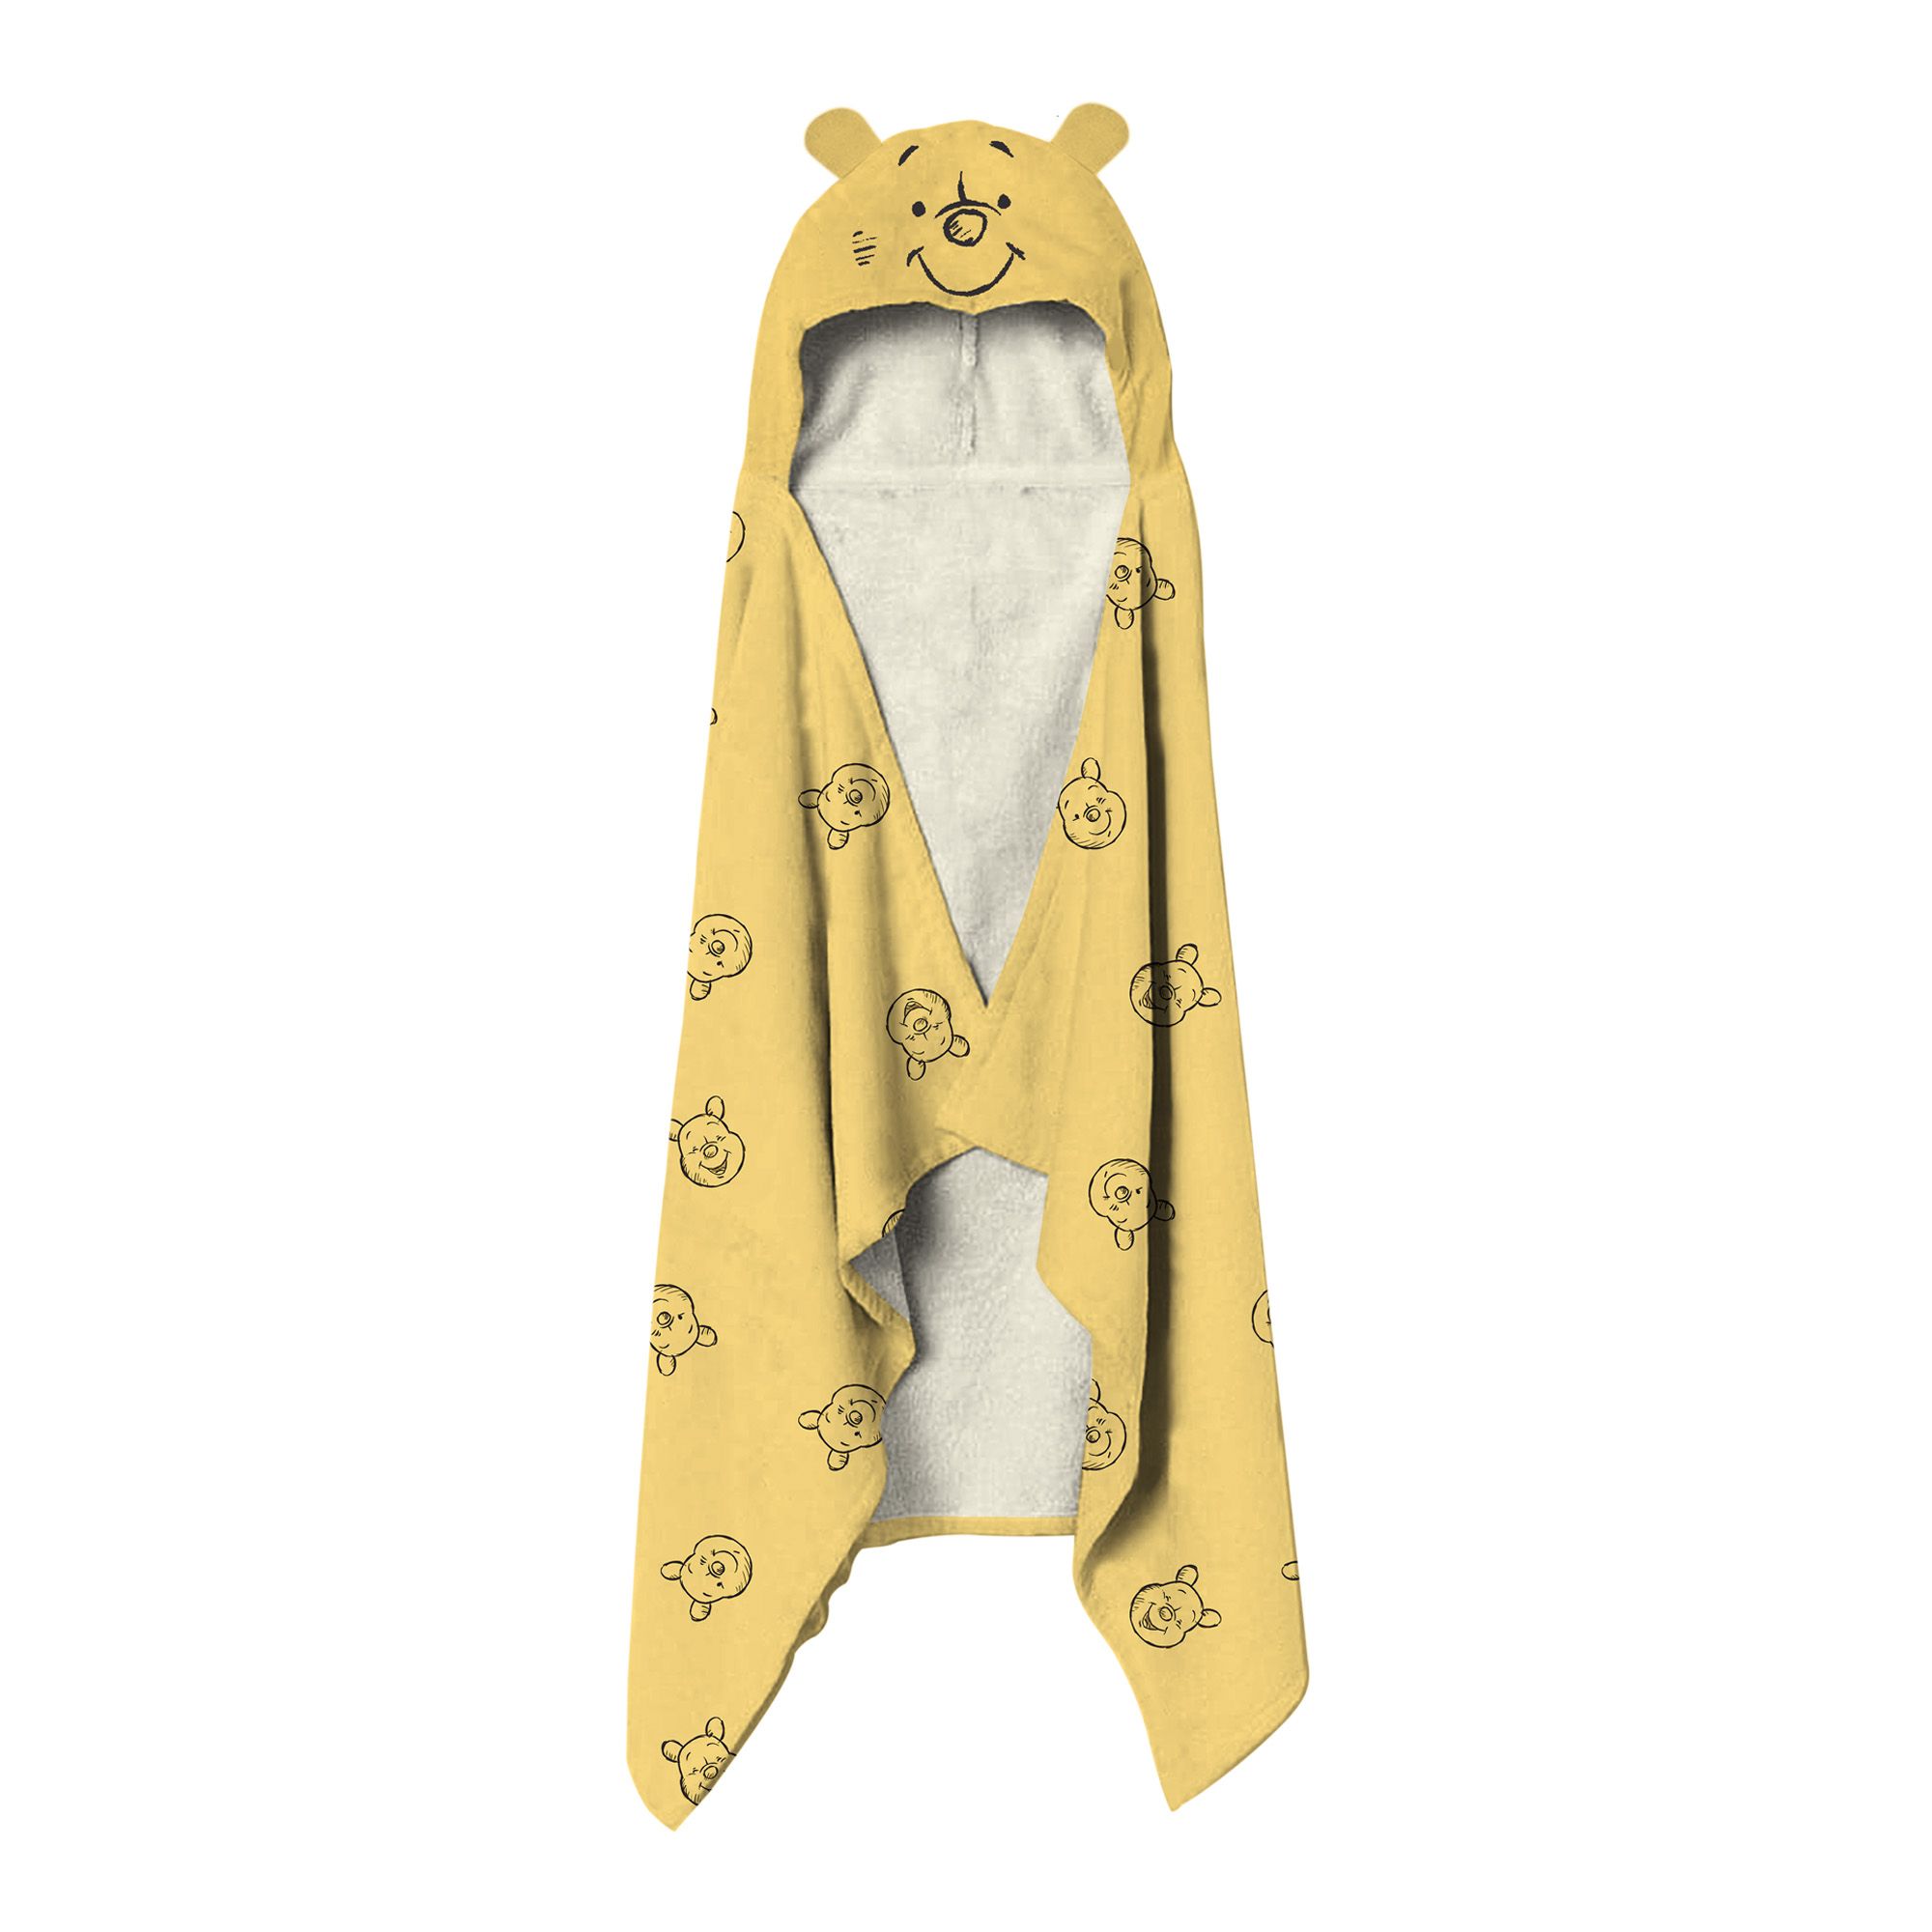 Have your little one excited for bathtime with this favourite Disney winnie the Pooh Hooded poncho towel. Crafted in soft and breathable 100% cotton, this yellow bath towel comes with a hood sporting Pooh's face while the towel flaunts rotary prints of Pooh's face overall on yellow. This towel measures 70 x 130 cm drapes warmly around them, after their bath. This is great towels for bath which definitely enhances your child's bath experience and makes it easier for you to cuddle your little one with love. 

 This is an official Disney Winnie the Pooh merchandise, you can now pair it up with matching Duvet cover set, Blankets, Fitted cot sheets and sleeping bags from the same collection.